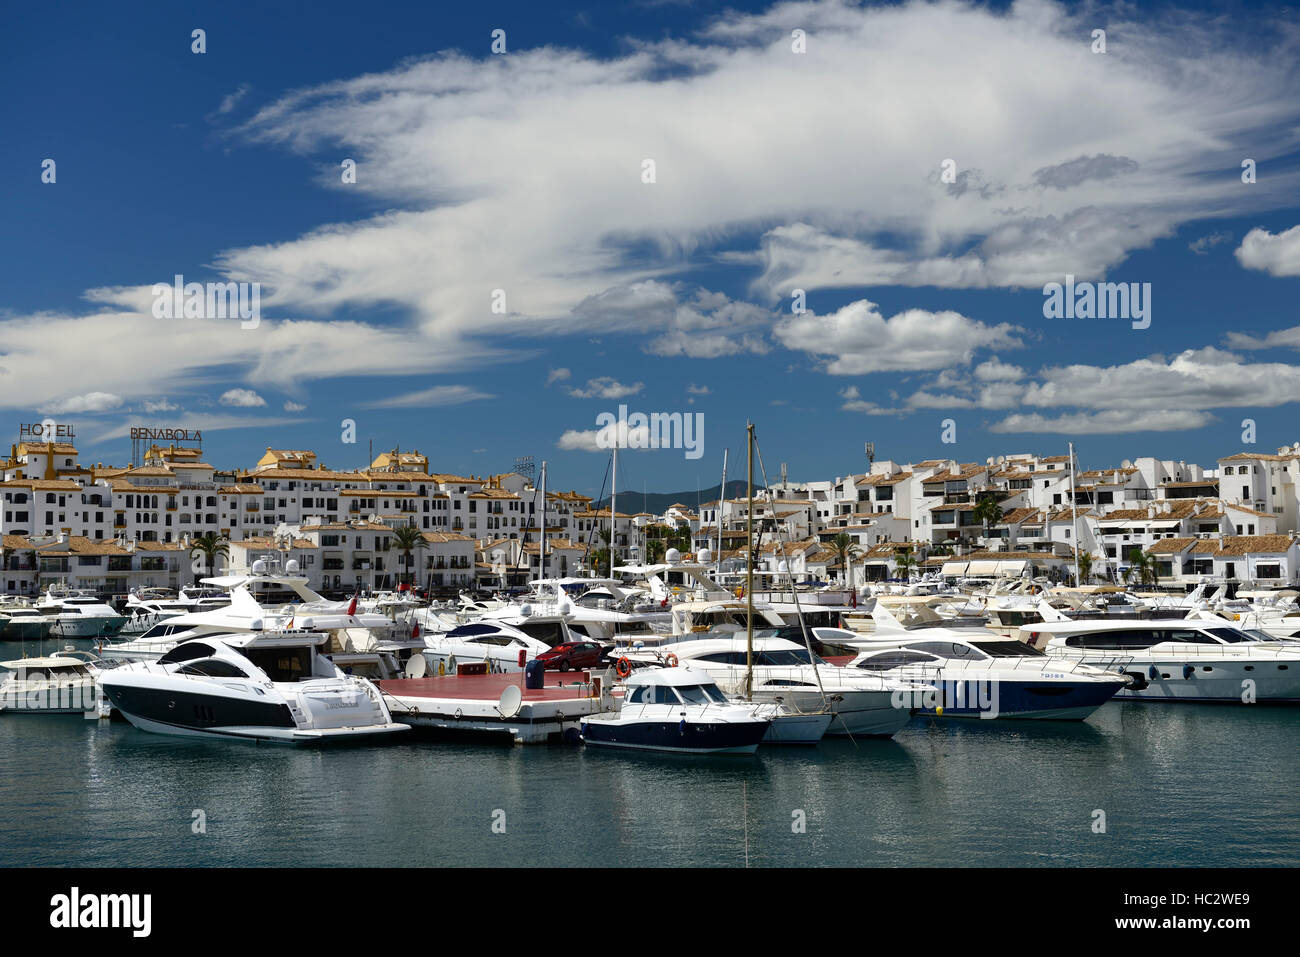 Luxury yachts Marina Puerto Banus Costa del Sol Andalucia Spain wealth wealthy yachting sun boat boating harbor harbour RM World Stock Photo